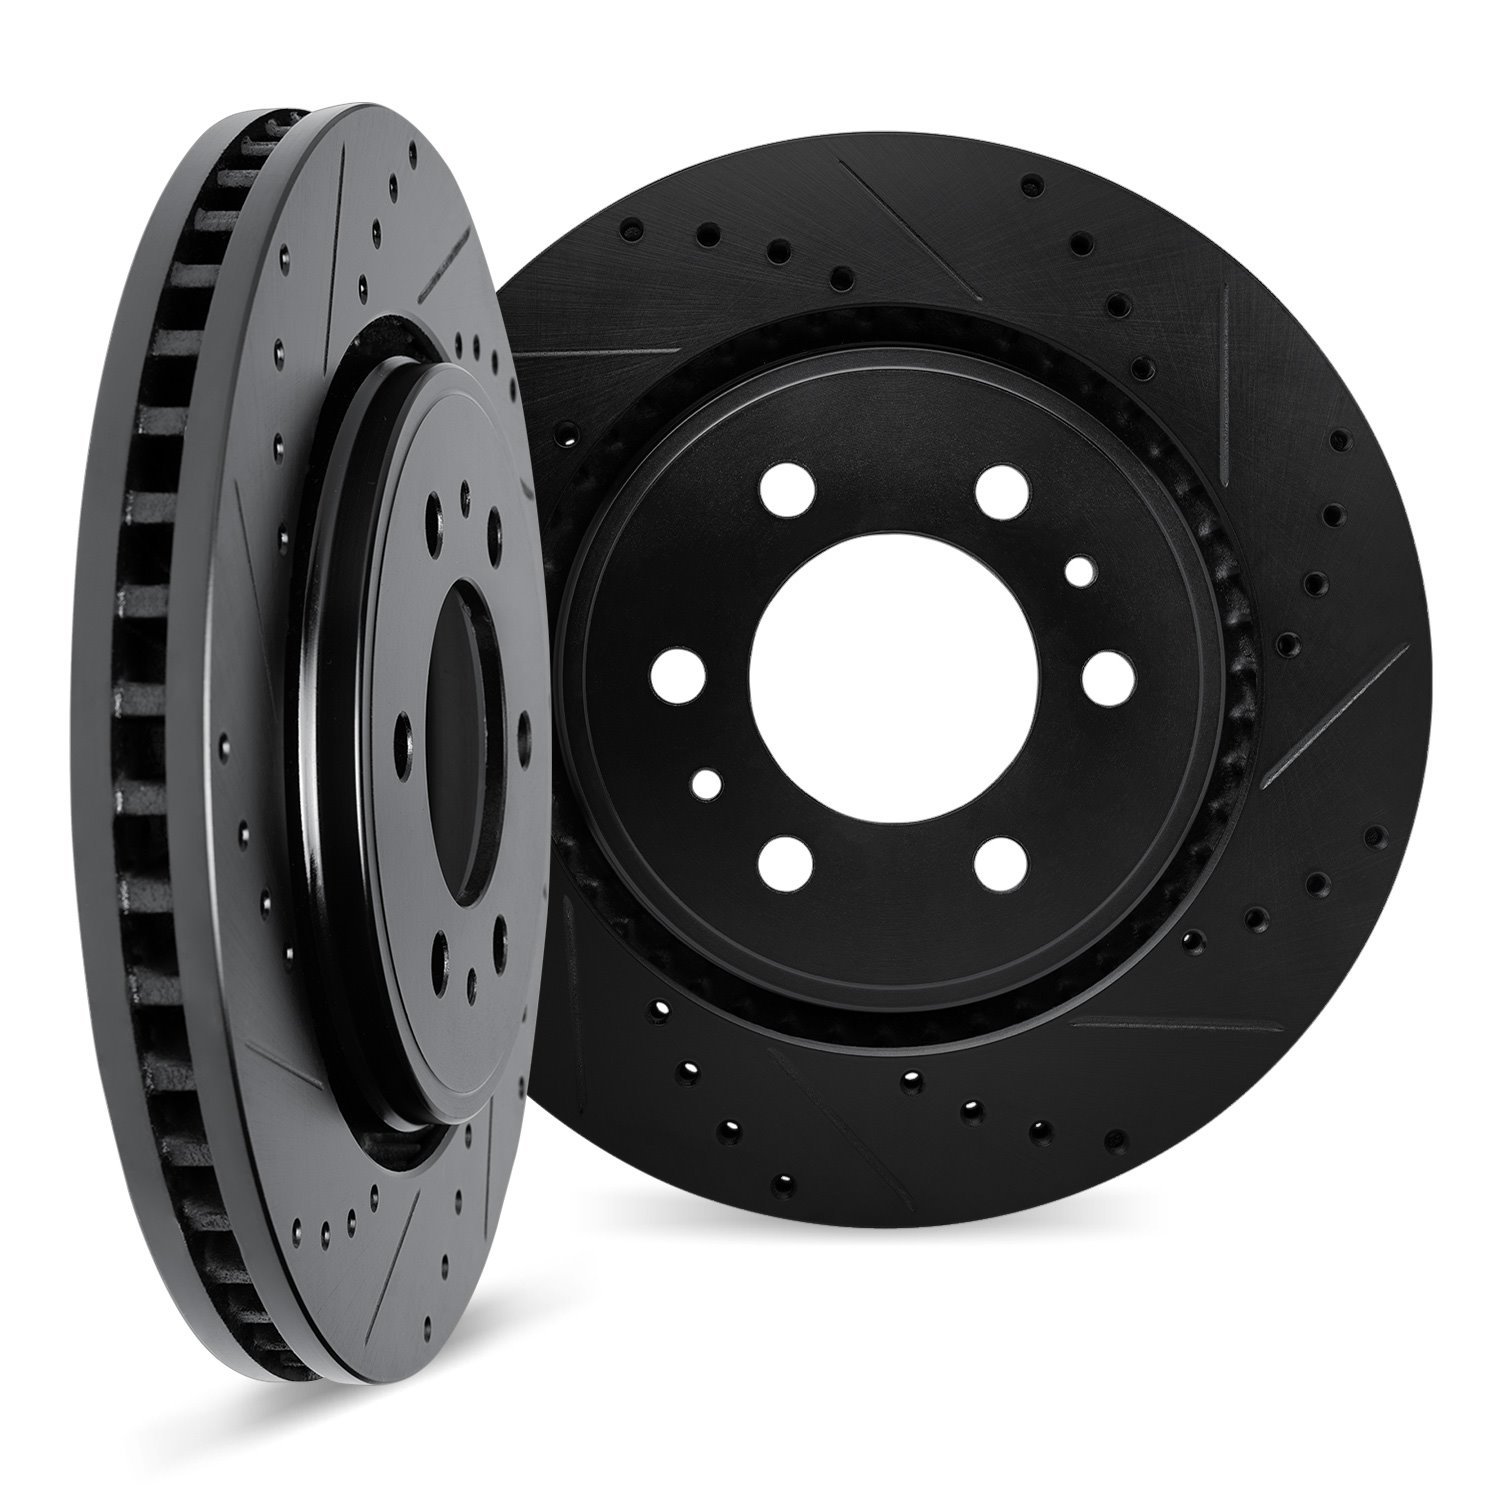 8002-47074 Drilled/Slotted Brake Rotors [Black], Fits Select GM, Position: Rear